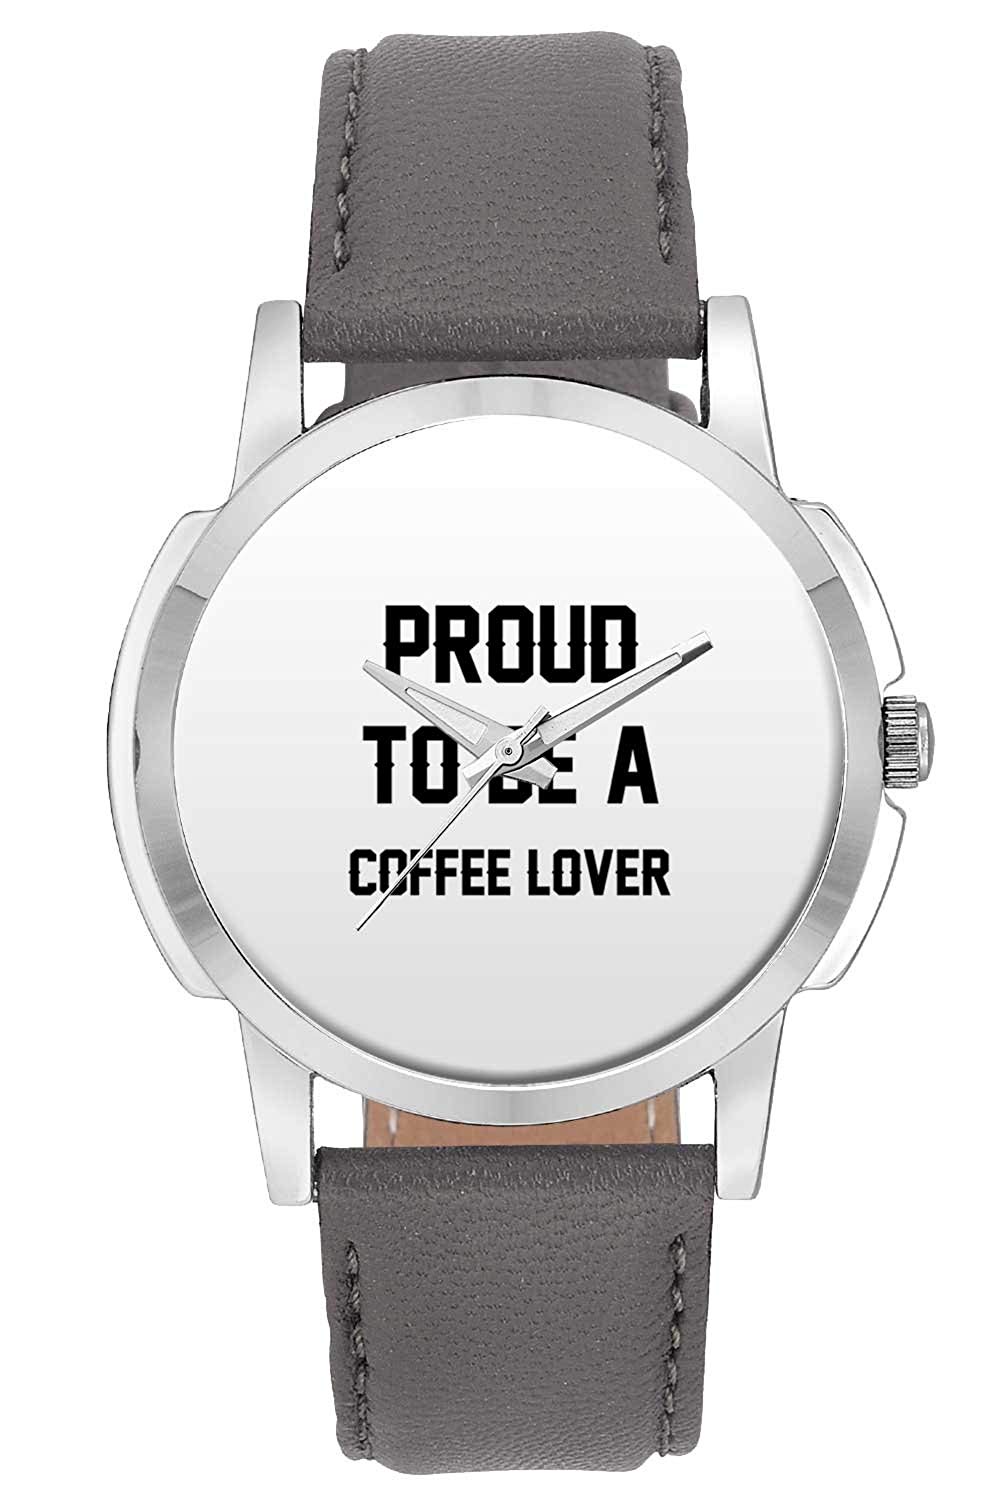 gift: watch | coffee | lover | perfect gifts for coffee lovers